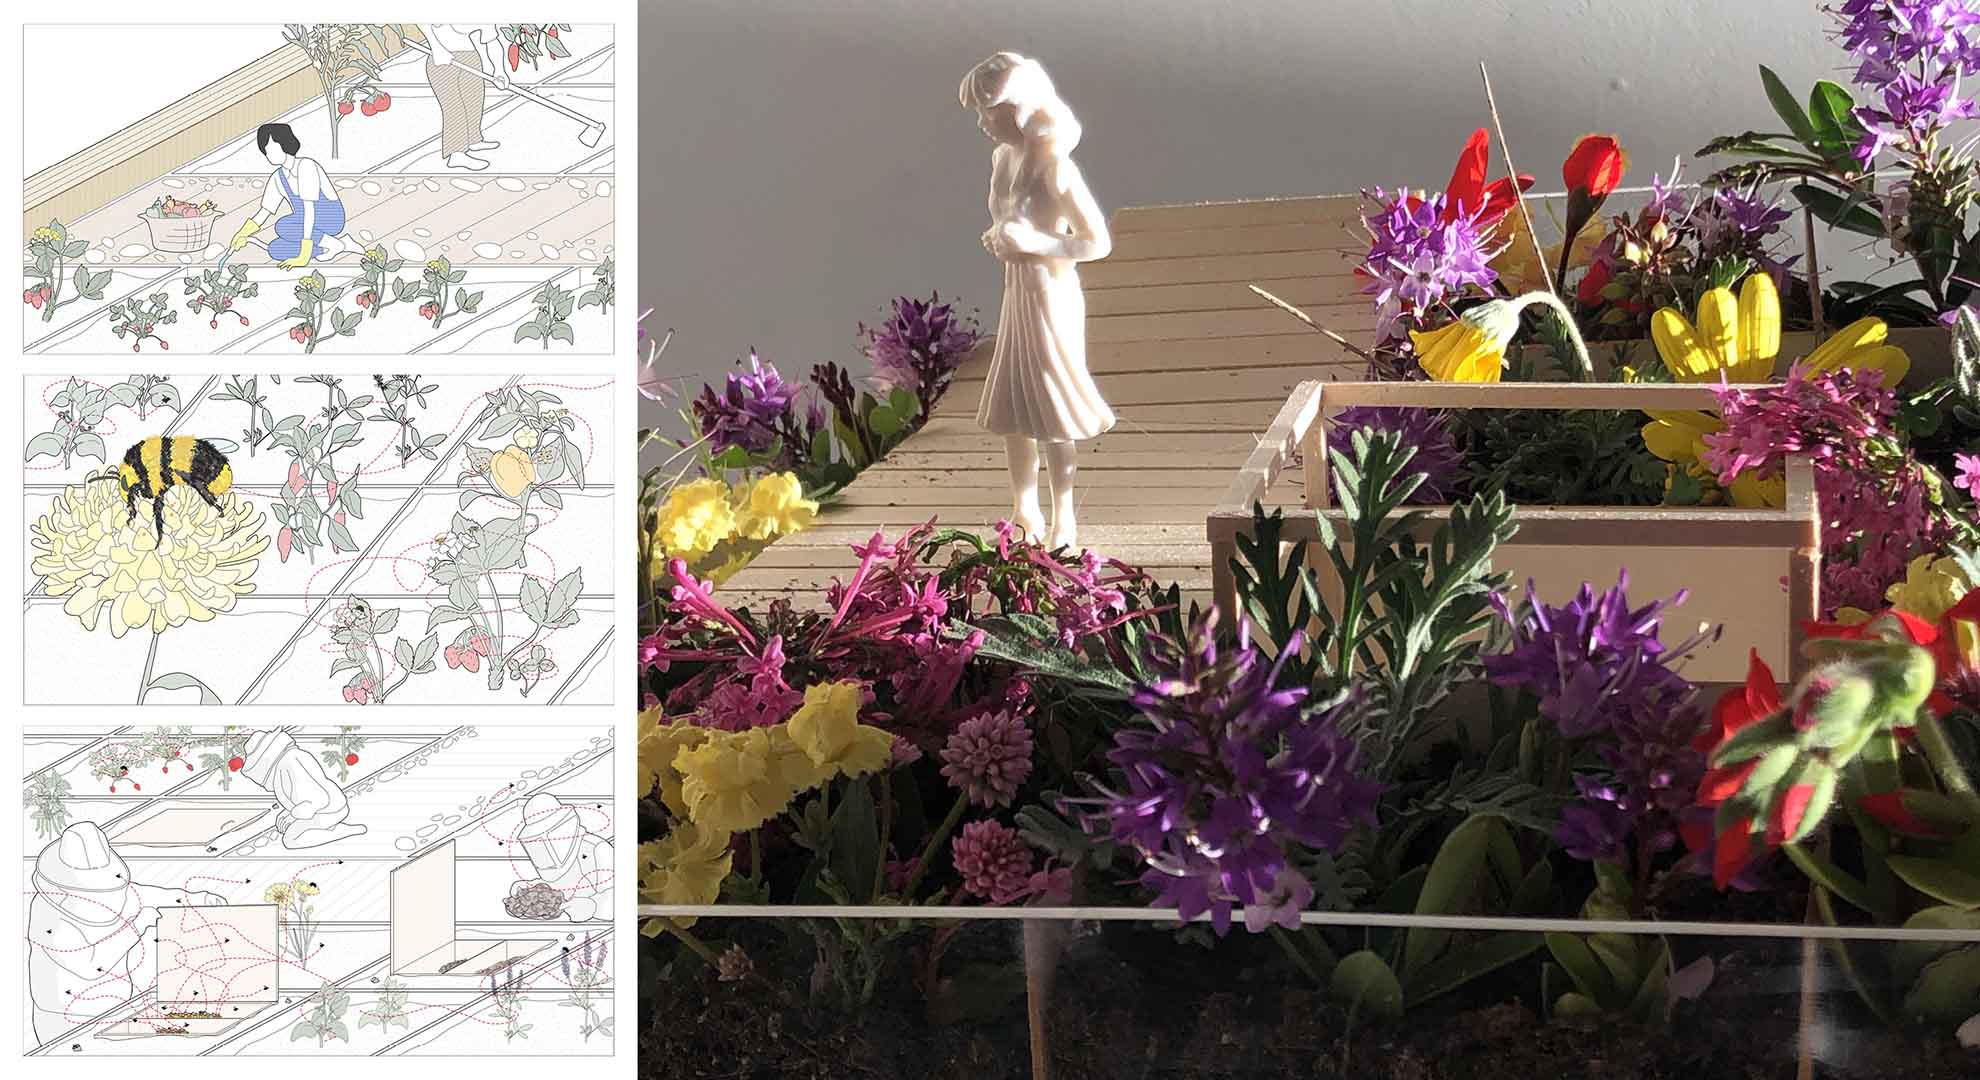 Laminated roof that integrates planters for the cohabitation of animal and plant species.